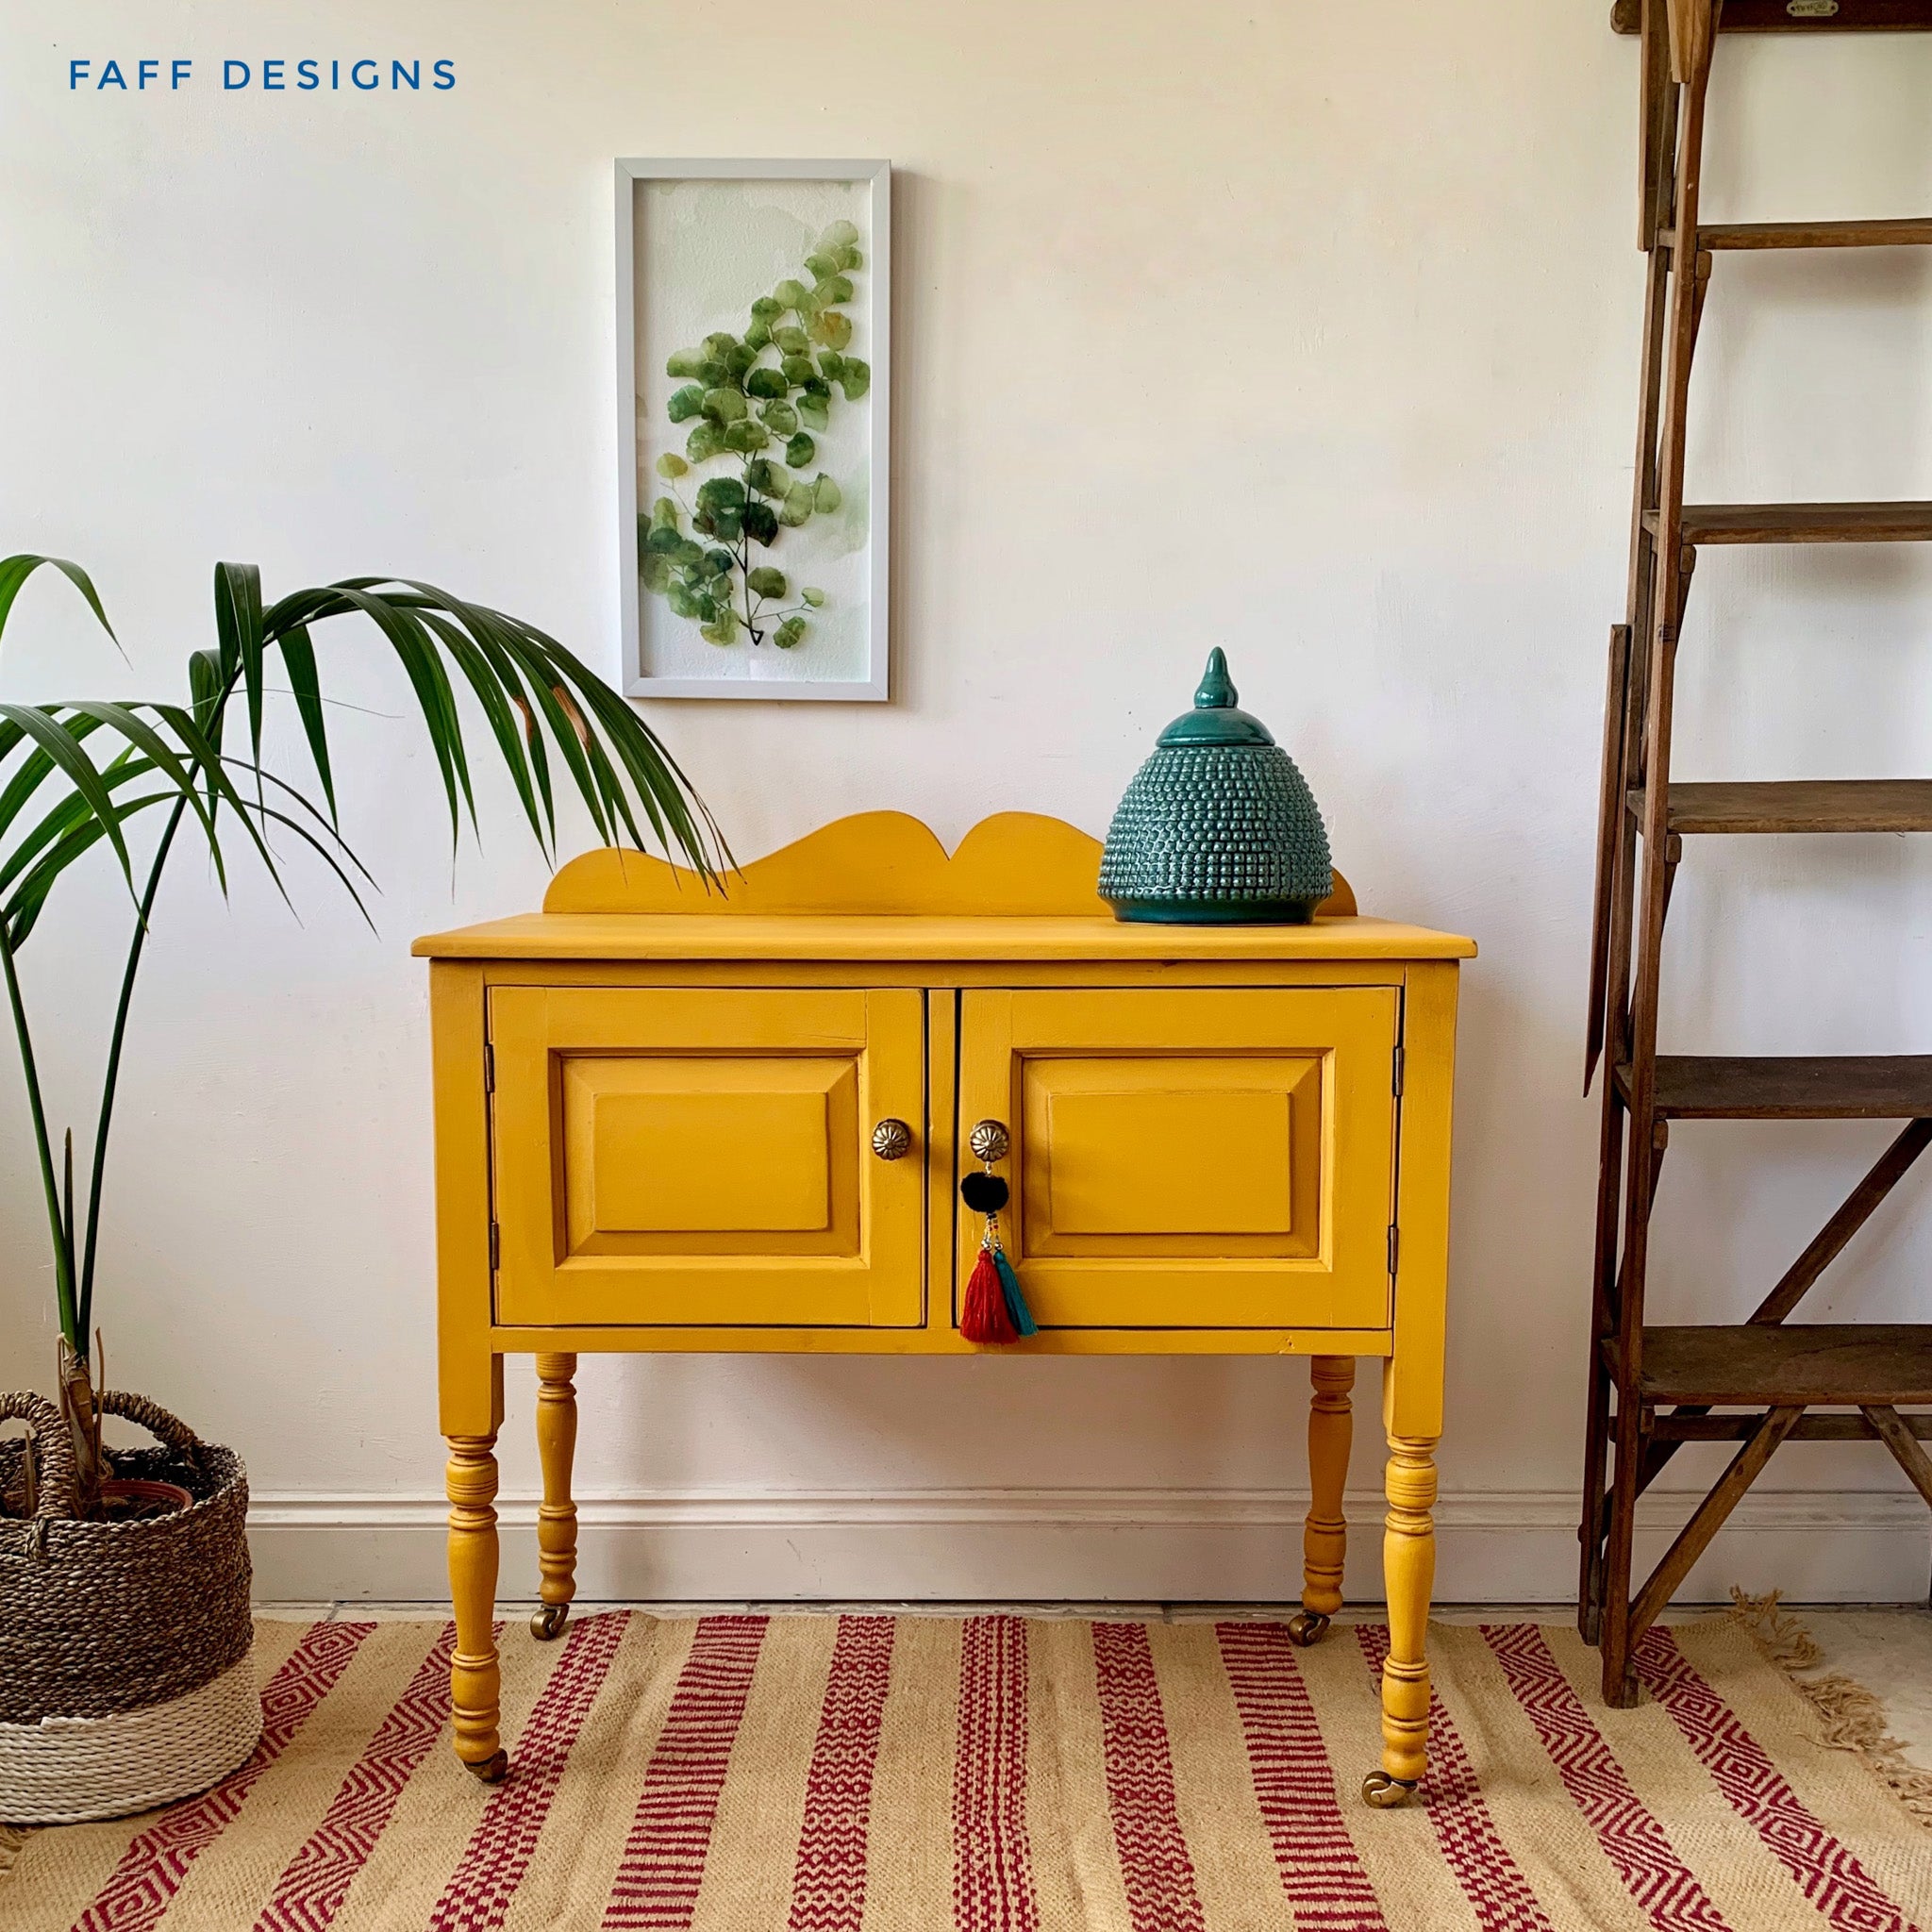 A vintage 2-door buffet table refurbished by Faff Designs is painted in Dixie Belle's Colonel Mustard chalk mineral paint.